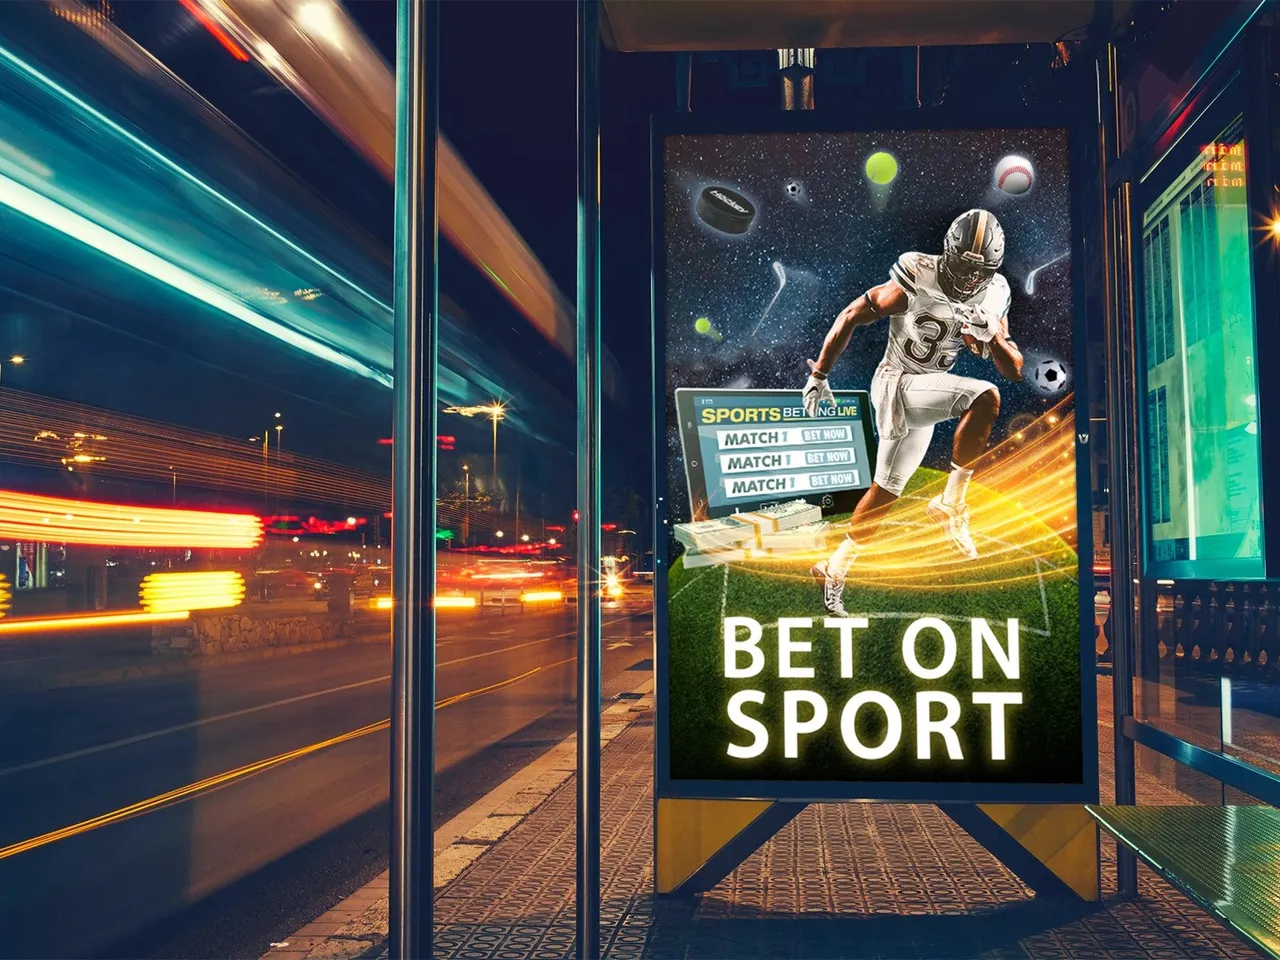 Centre asks states to crack down on outdoor advertisements of betting, gambling platforms